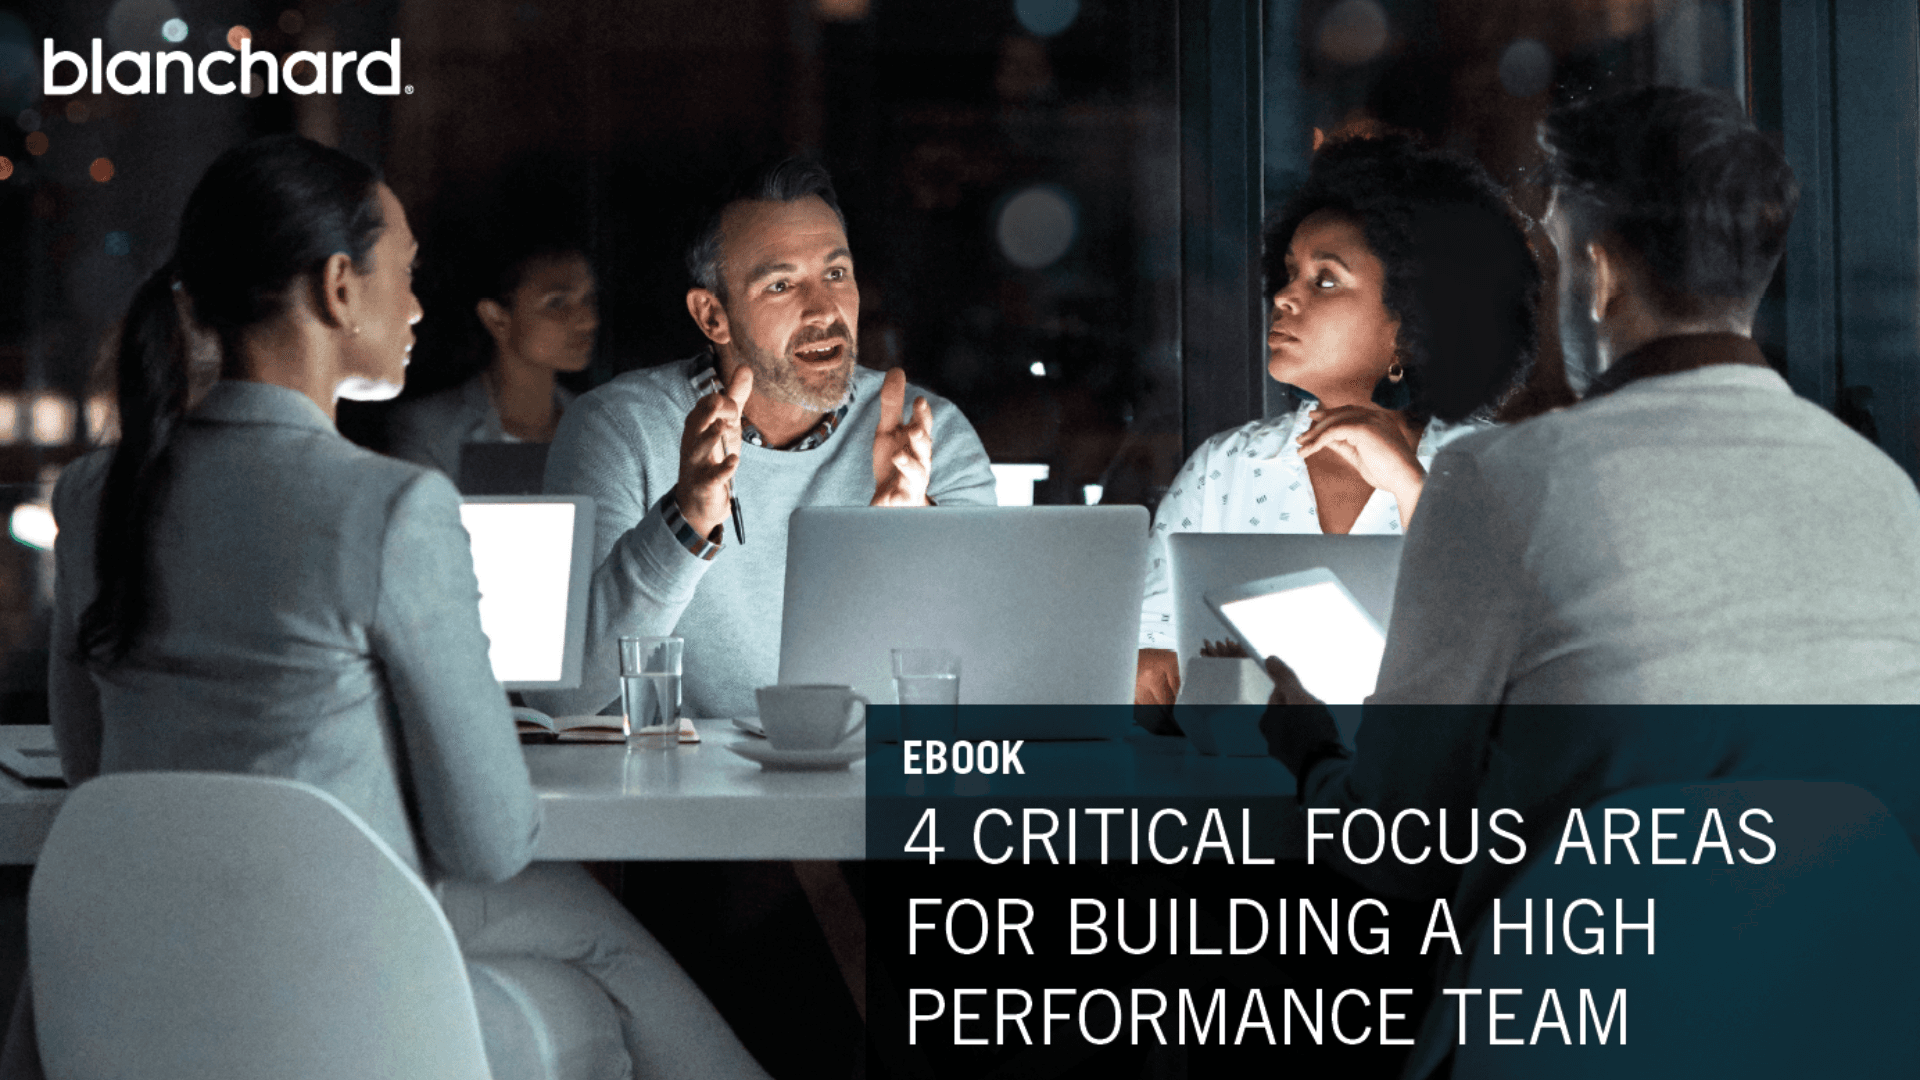 Ressources 4 Critical Focus Areas for Building a High Performance Team